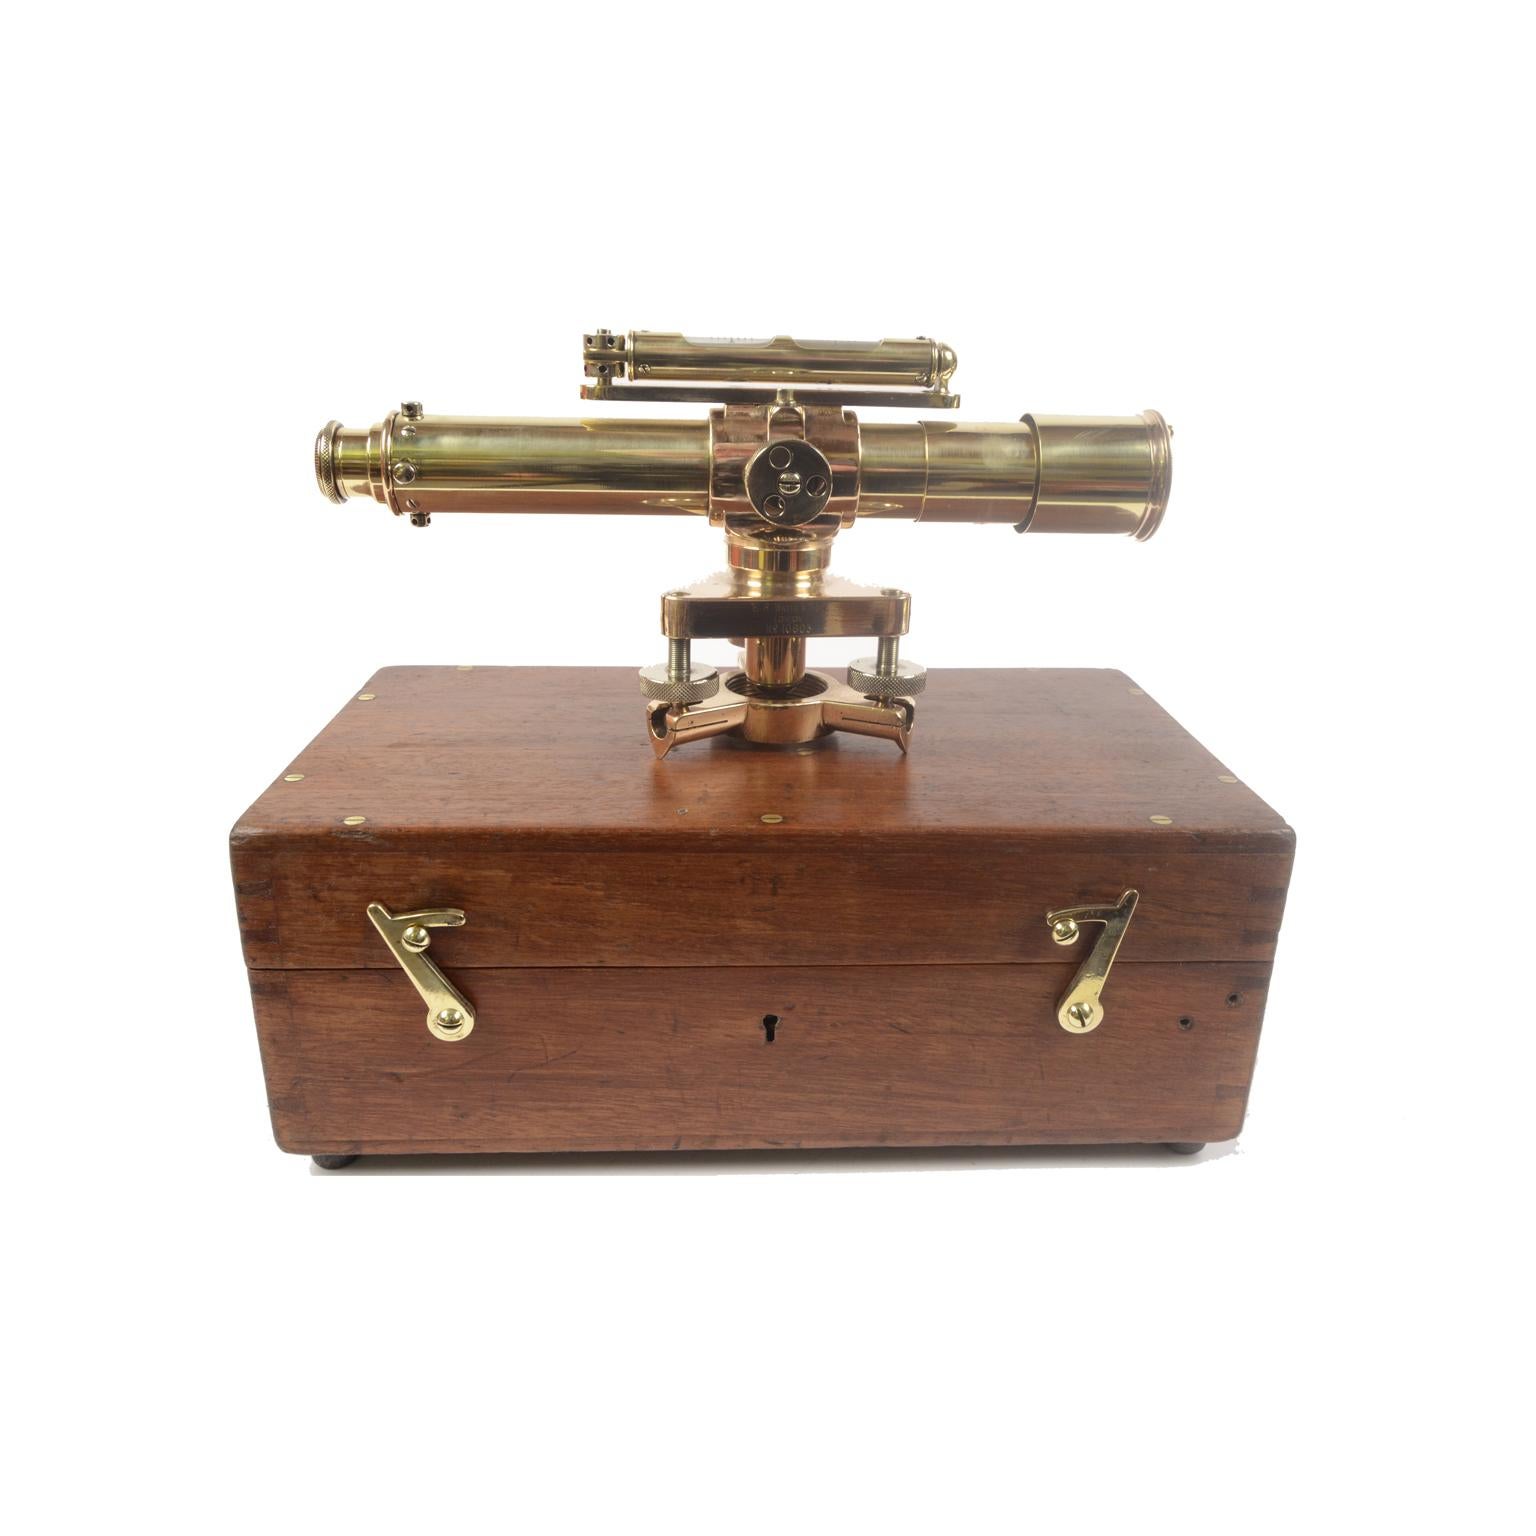 Telescope topographic level, made of brass with base with three leveling screws, from the end of the 19th century. signed R. Watts & Sond London, manufacturers of theodolites and other surveying instruments, active in London since 1856 and marketed